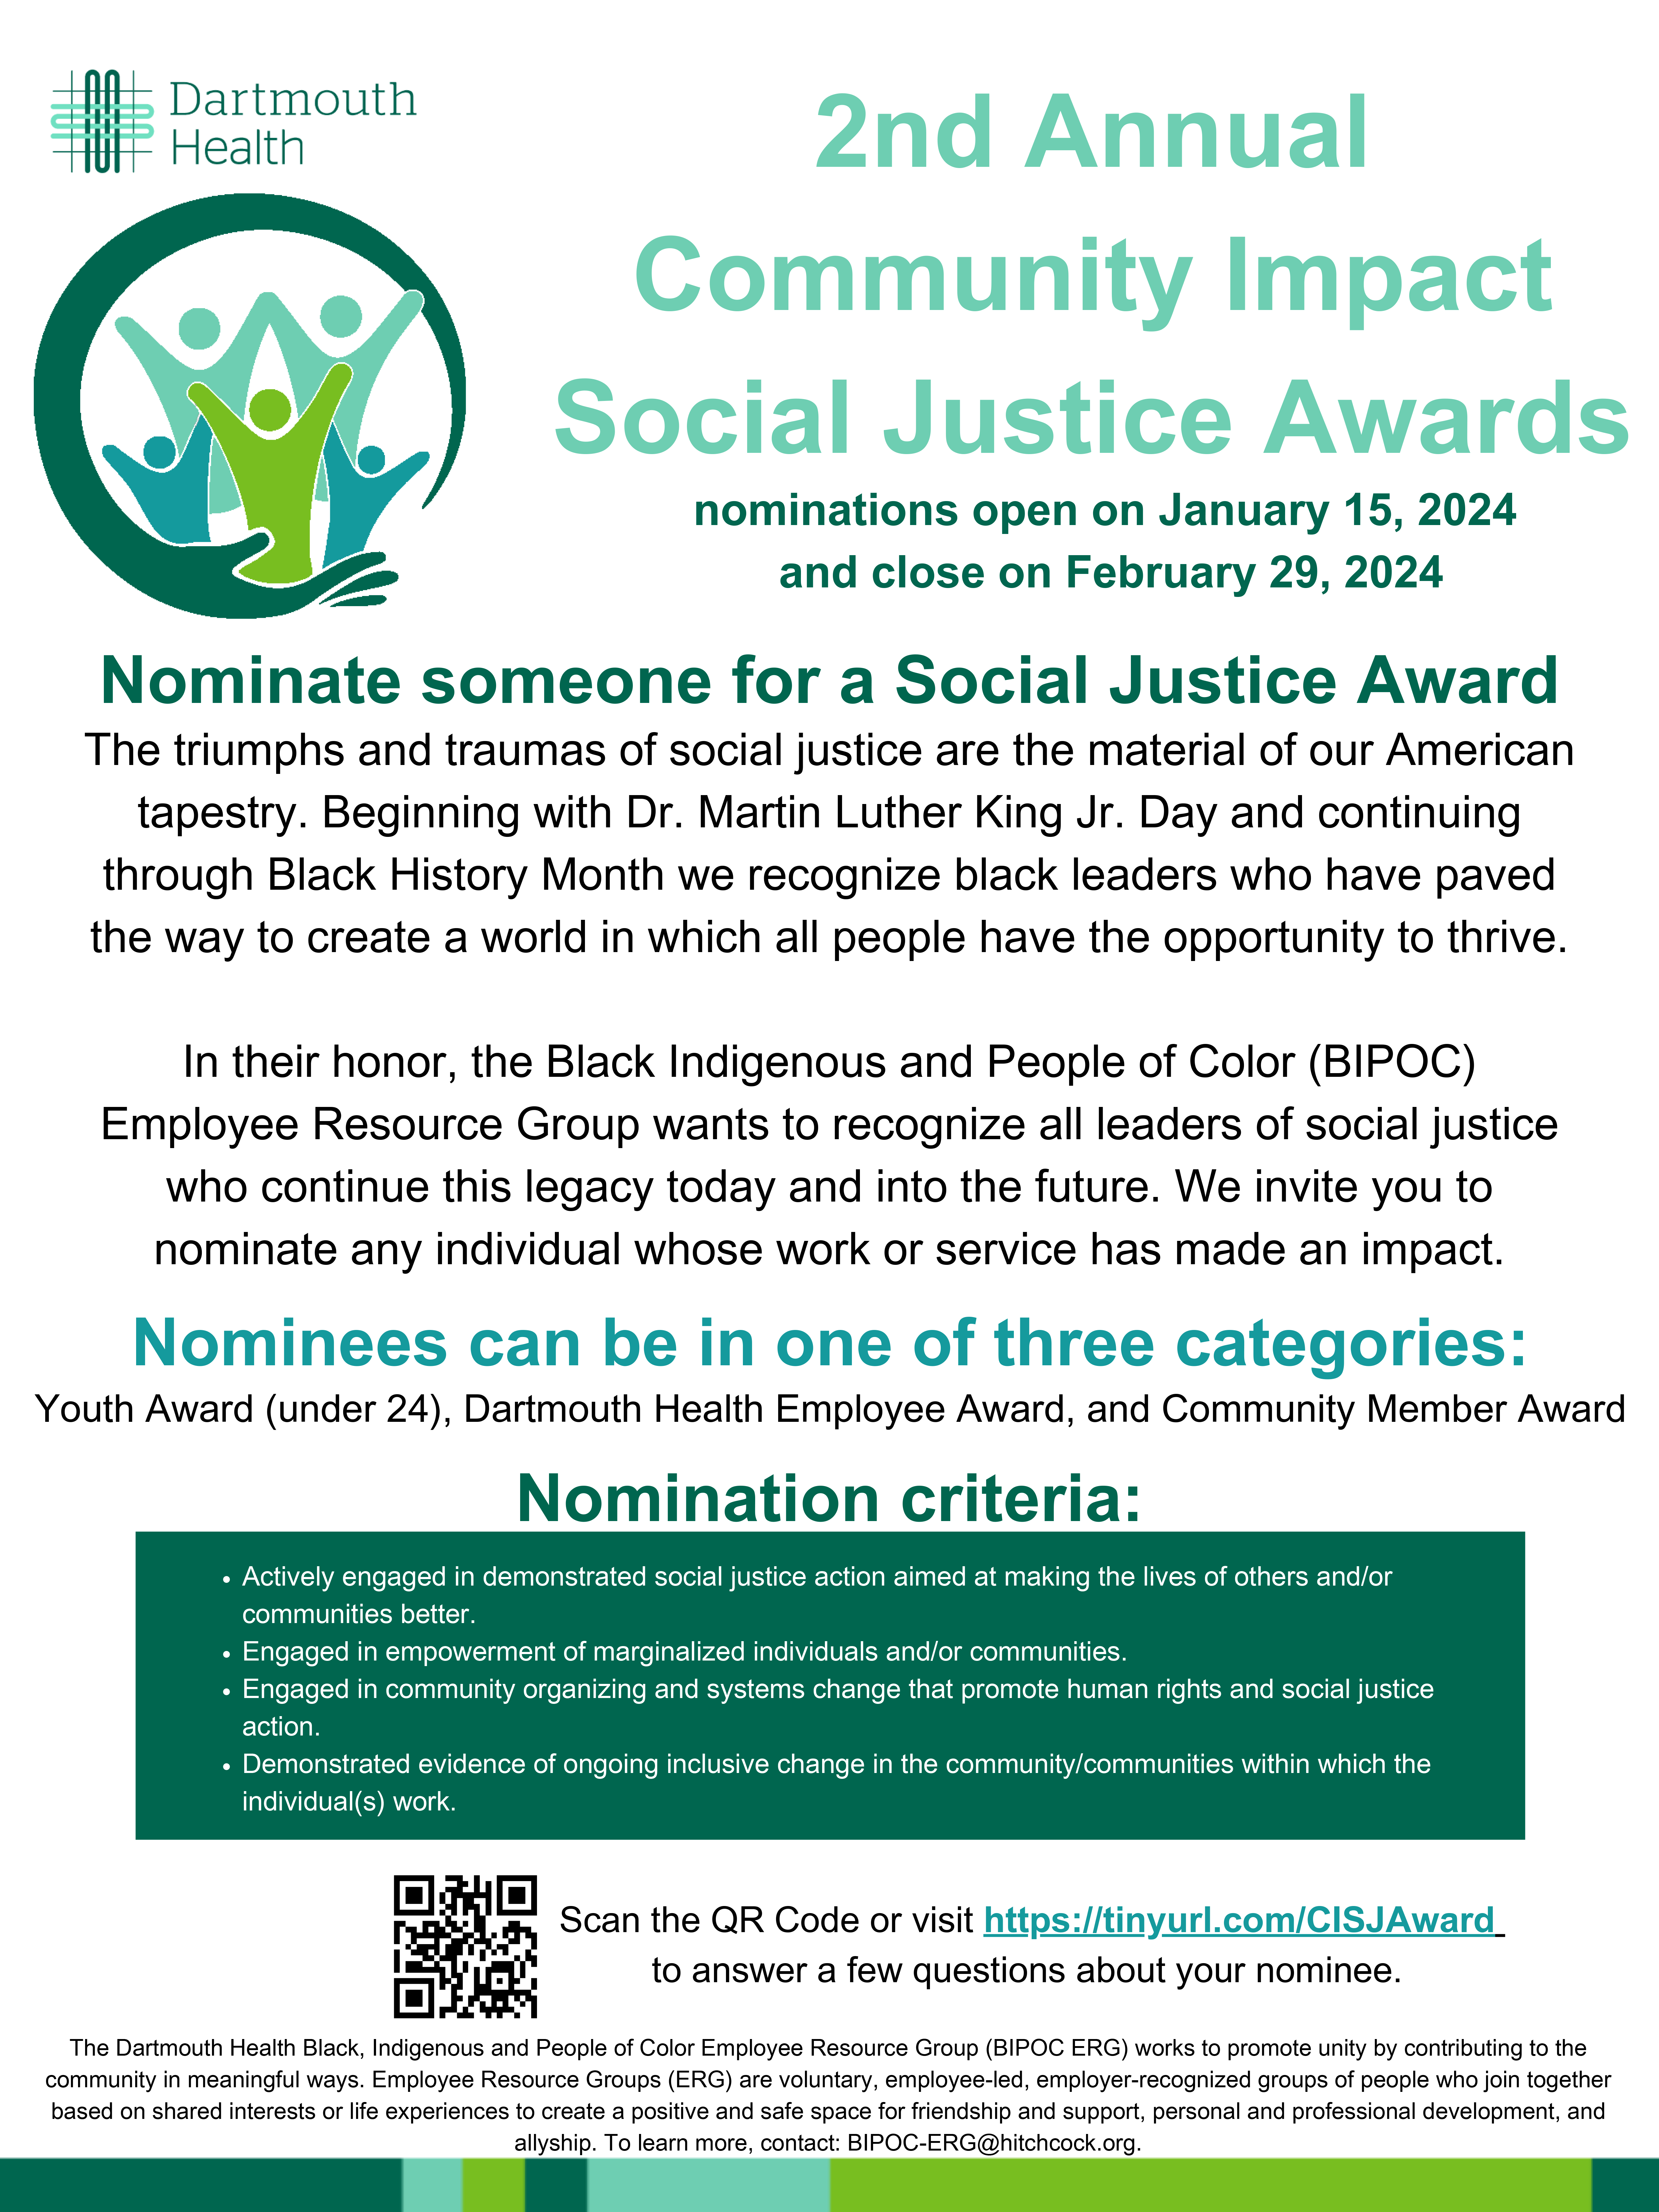 2nd AnnualCommunity ImpactSocial Justice Awards